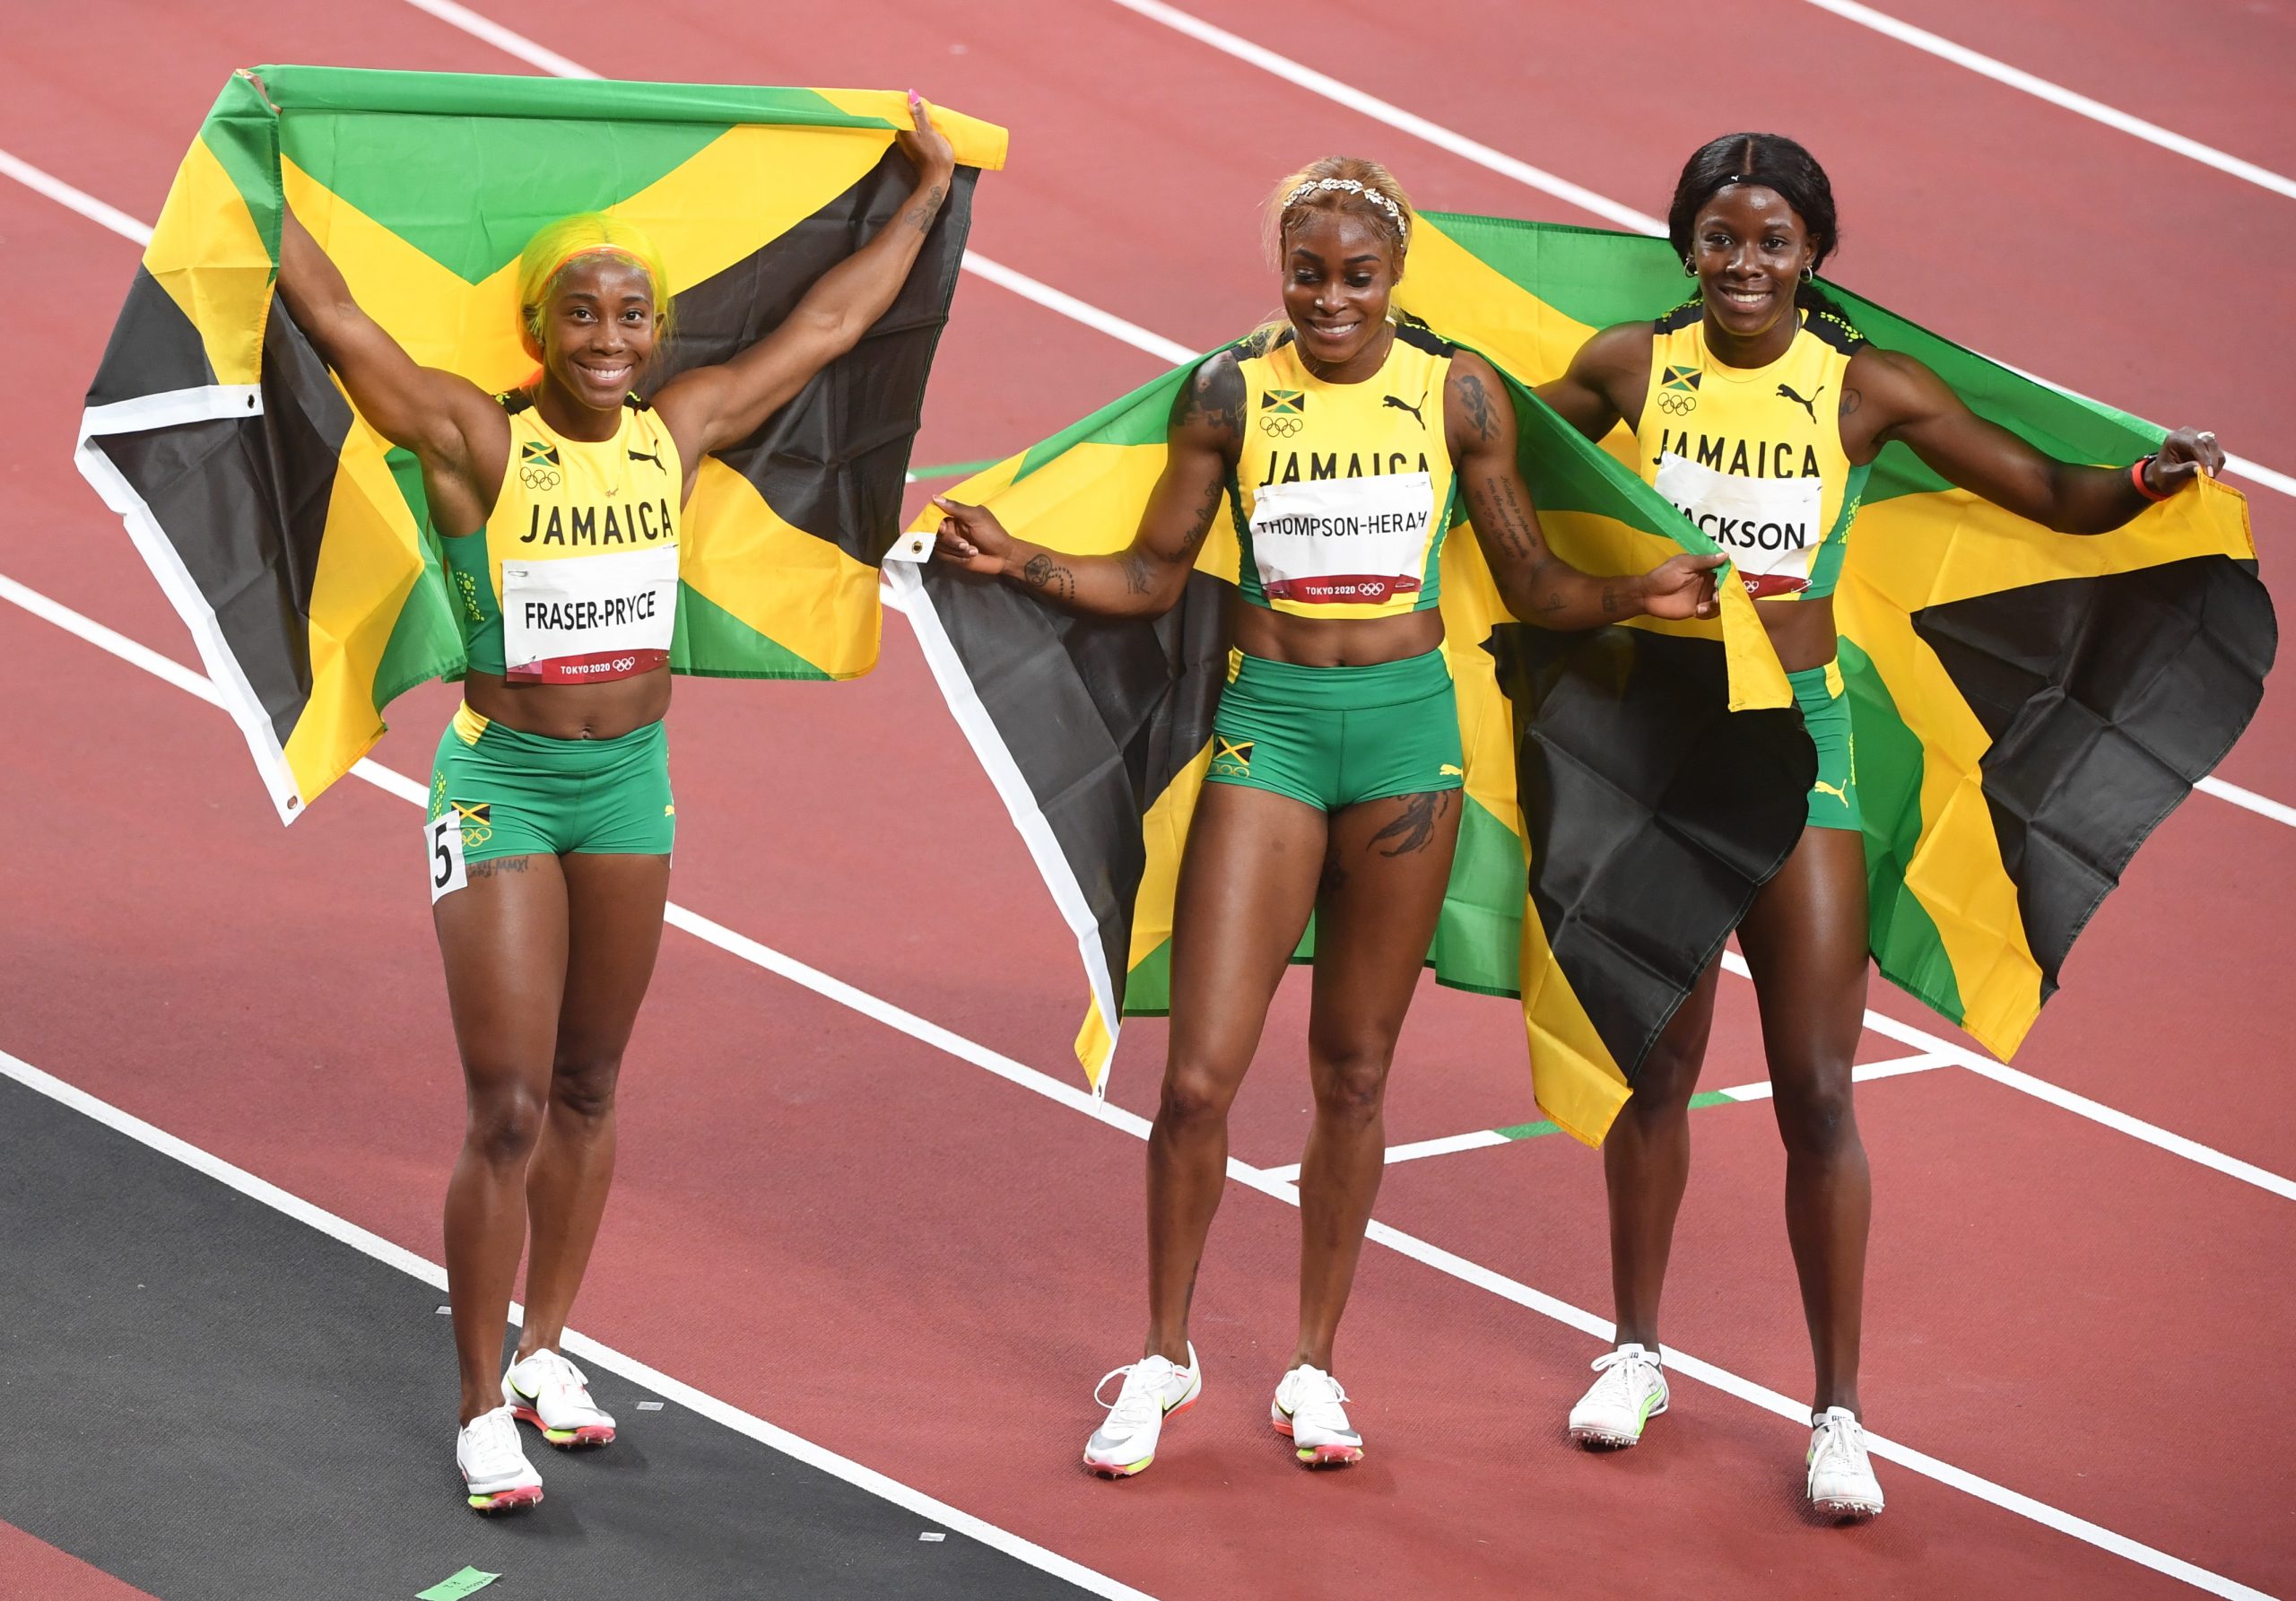 Eying Paris 2024 ---- Clean sweep Tokyo 2020 Olympic Games 100m podium finishers Elaine Thompson-Herah, Shelly-Ann Fraser-Pryce, and Shericka Jackson in Paris Diamond League